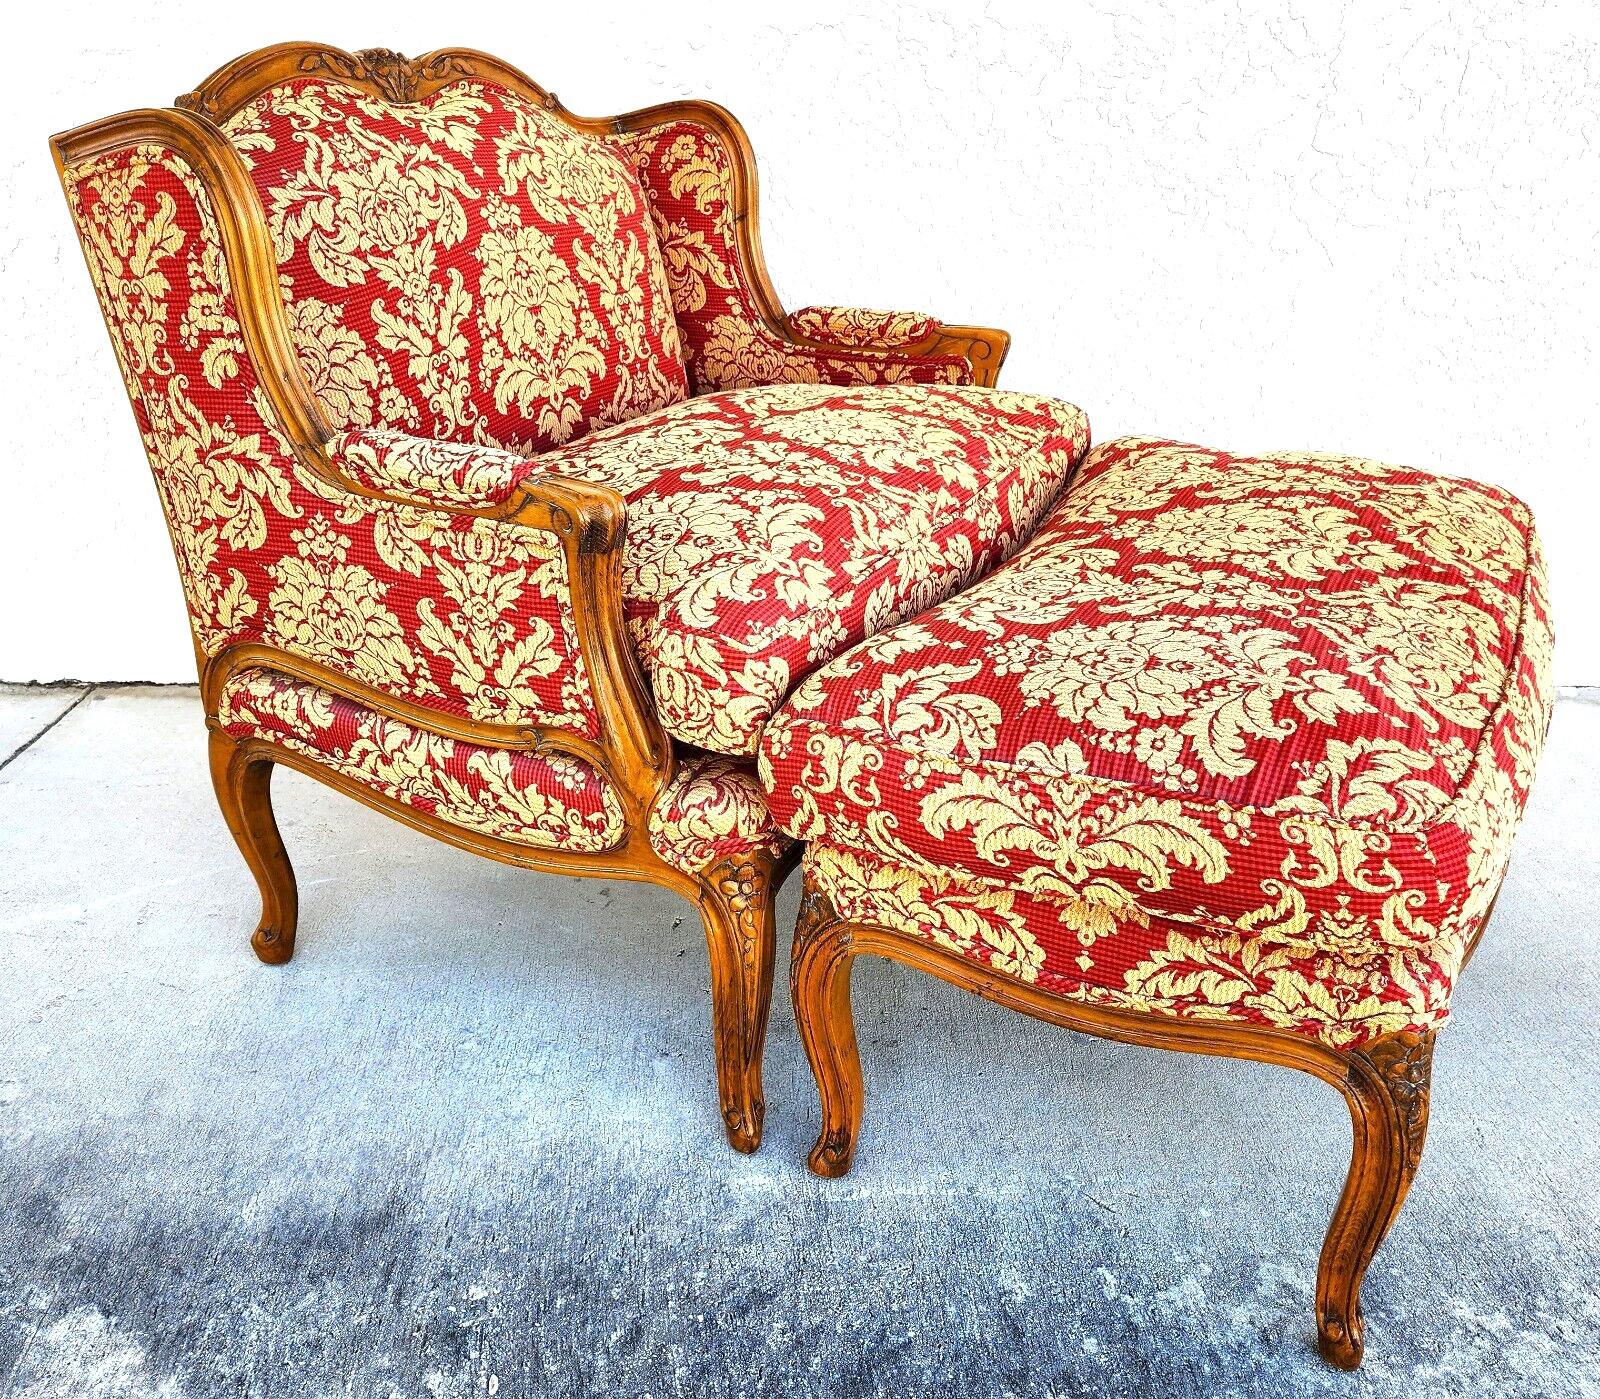 For FULL item description click on CONTINUE READING at the bottom of this page.

Offering One Of Our Recent Palm Beach Estate Fine Furniture Acquisitions Of An
Oversized French Bergere Chair & Ottoman 
Featuring heavy cotton fabric, carved walnut